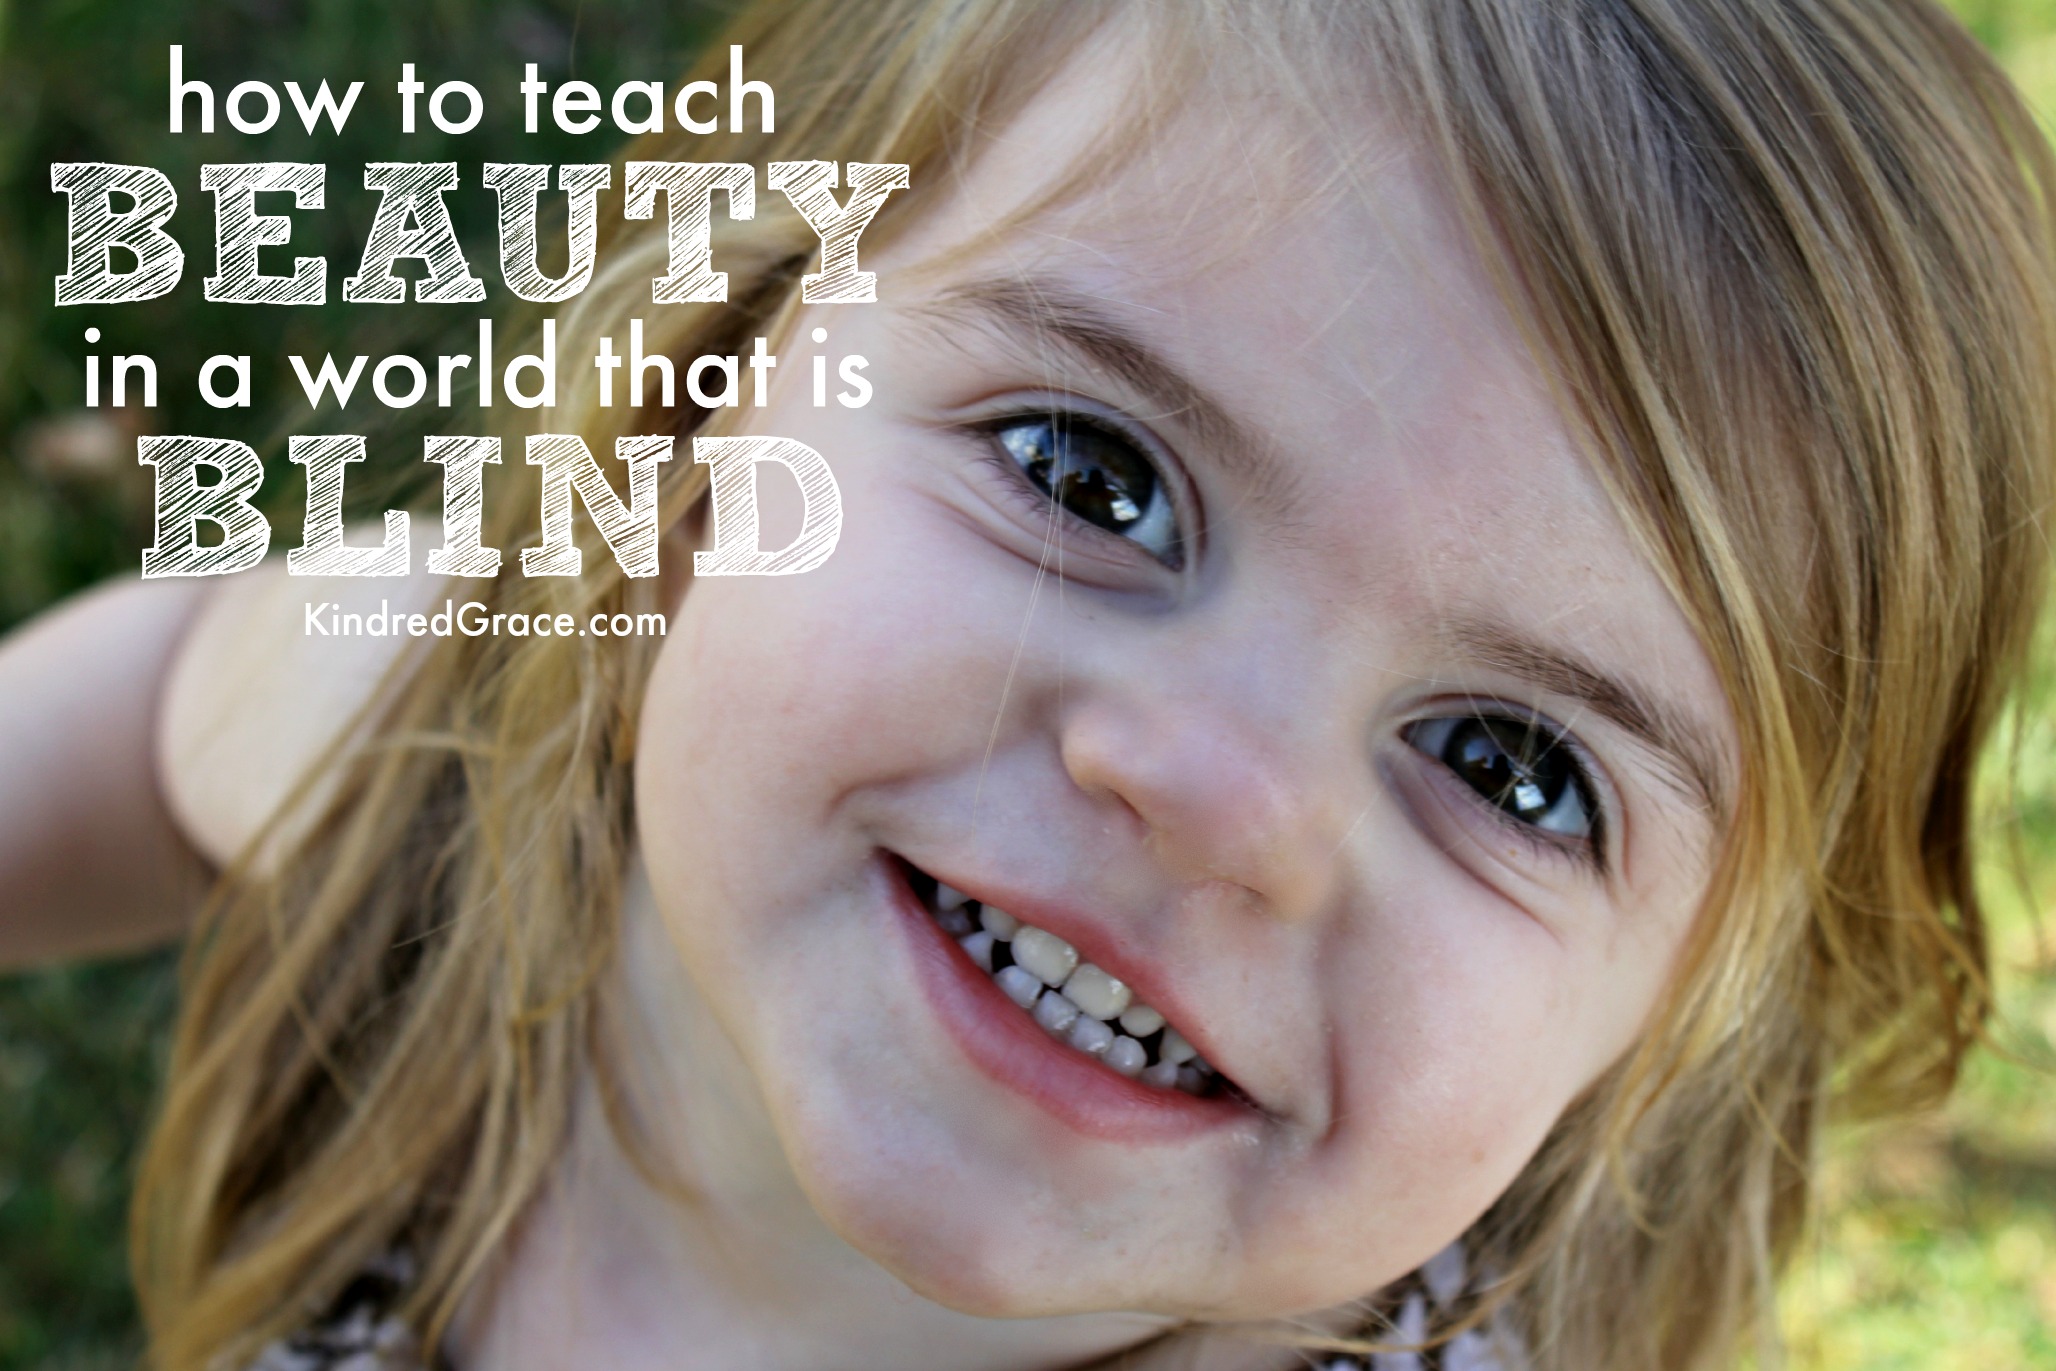 How To Teach Beauty In A World That Is Blind